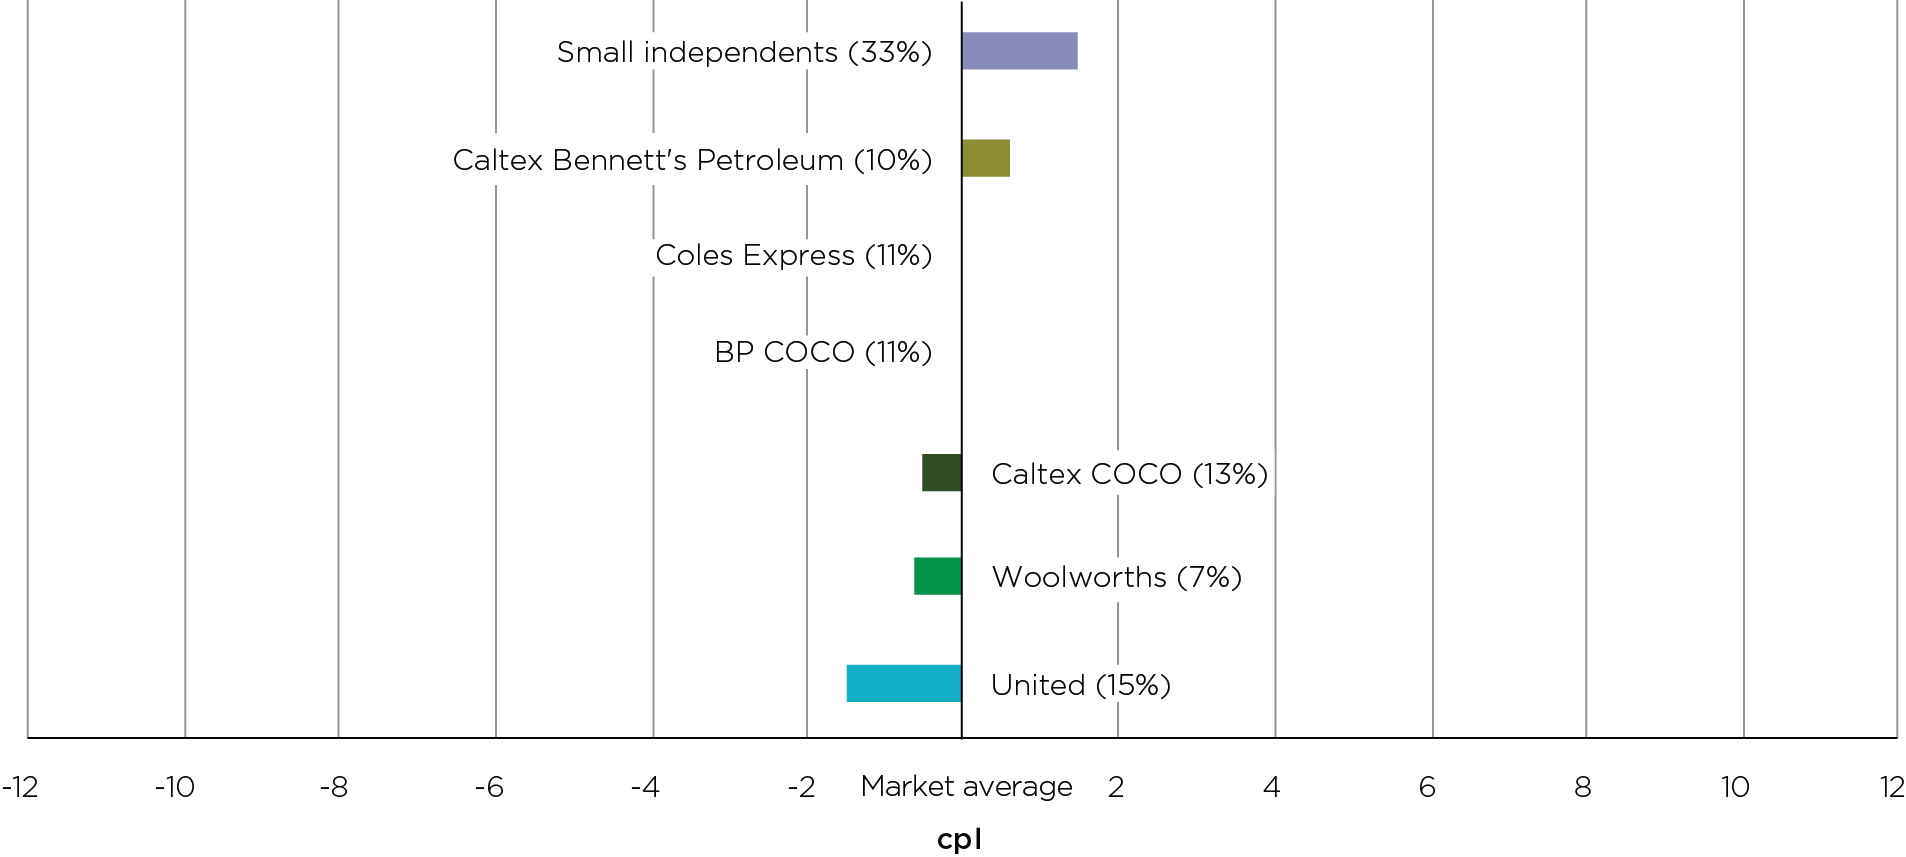 In 2020, Hobart motorists could have saved 3 cents per litre by buying petrol at the lowest-priced retailer, which was United, rather than the highest-priced retailers, which were small independents.